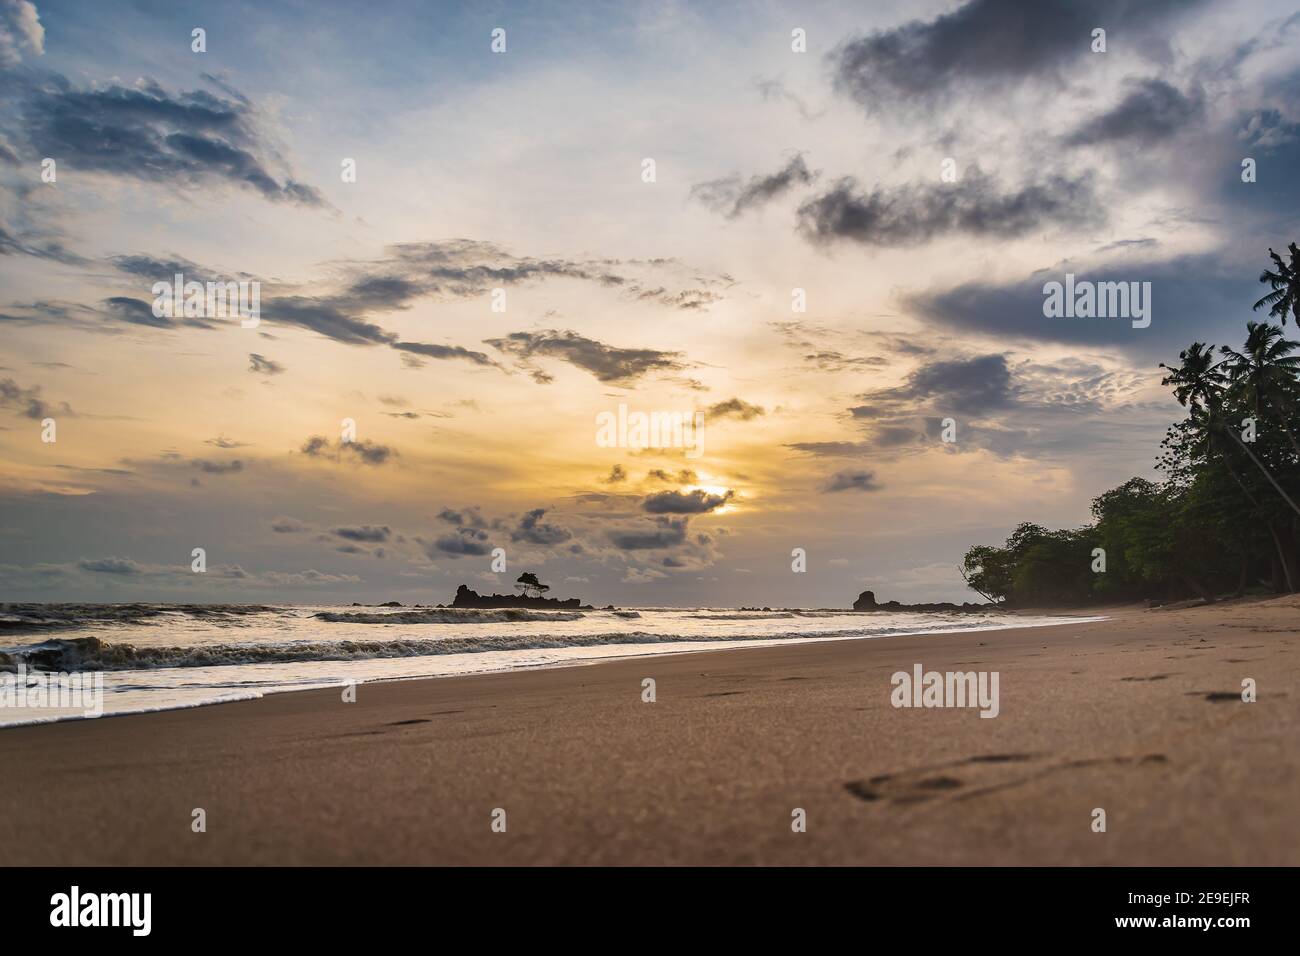 Sunset silhouette in Africa's gold coast Axim Ghana West Africa Stock Photo